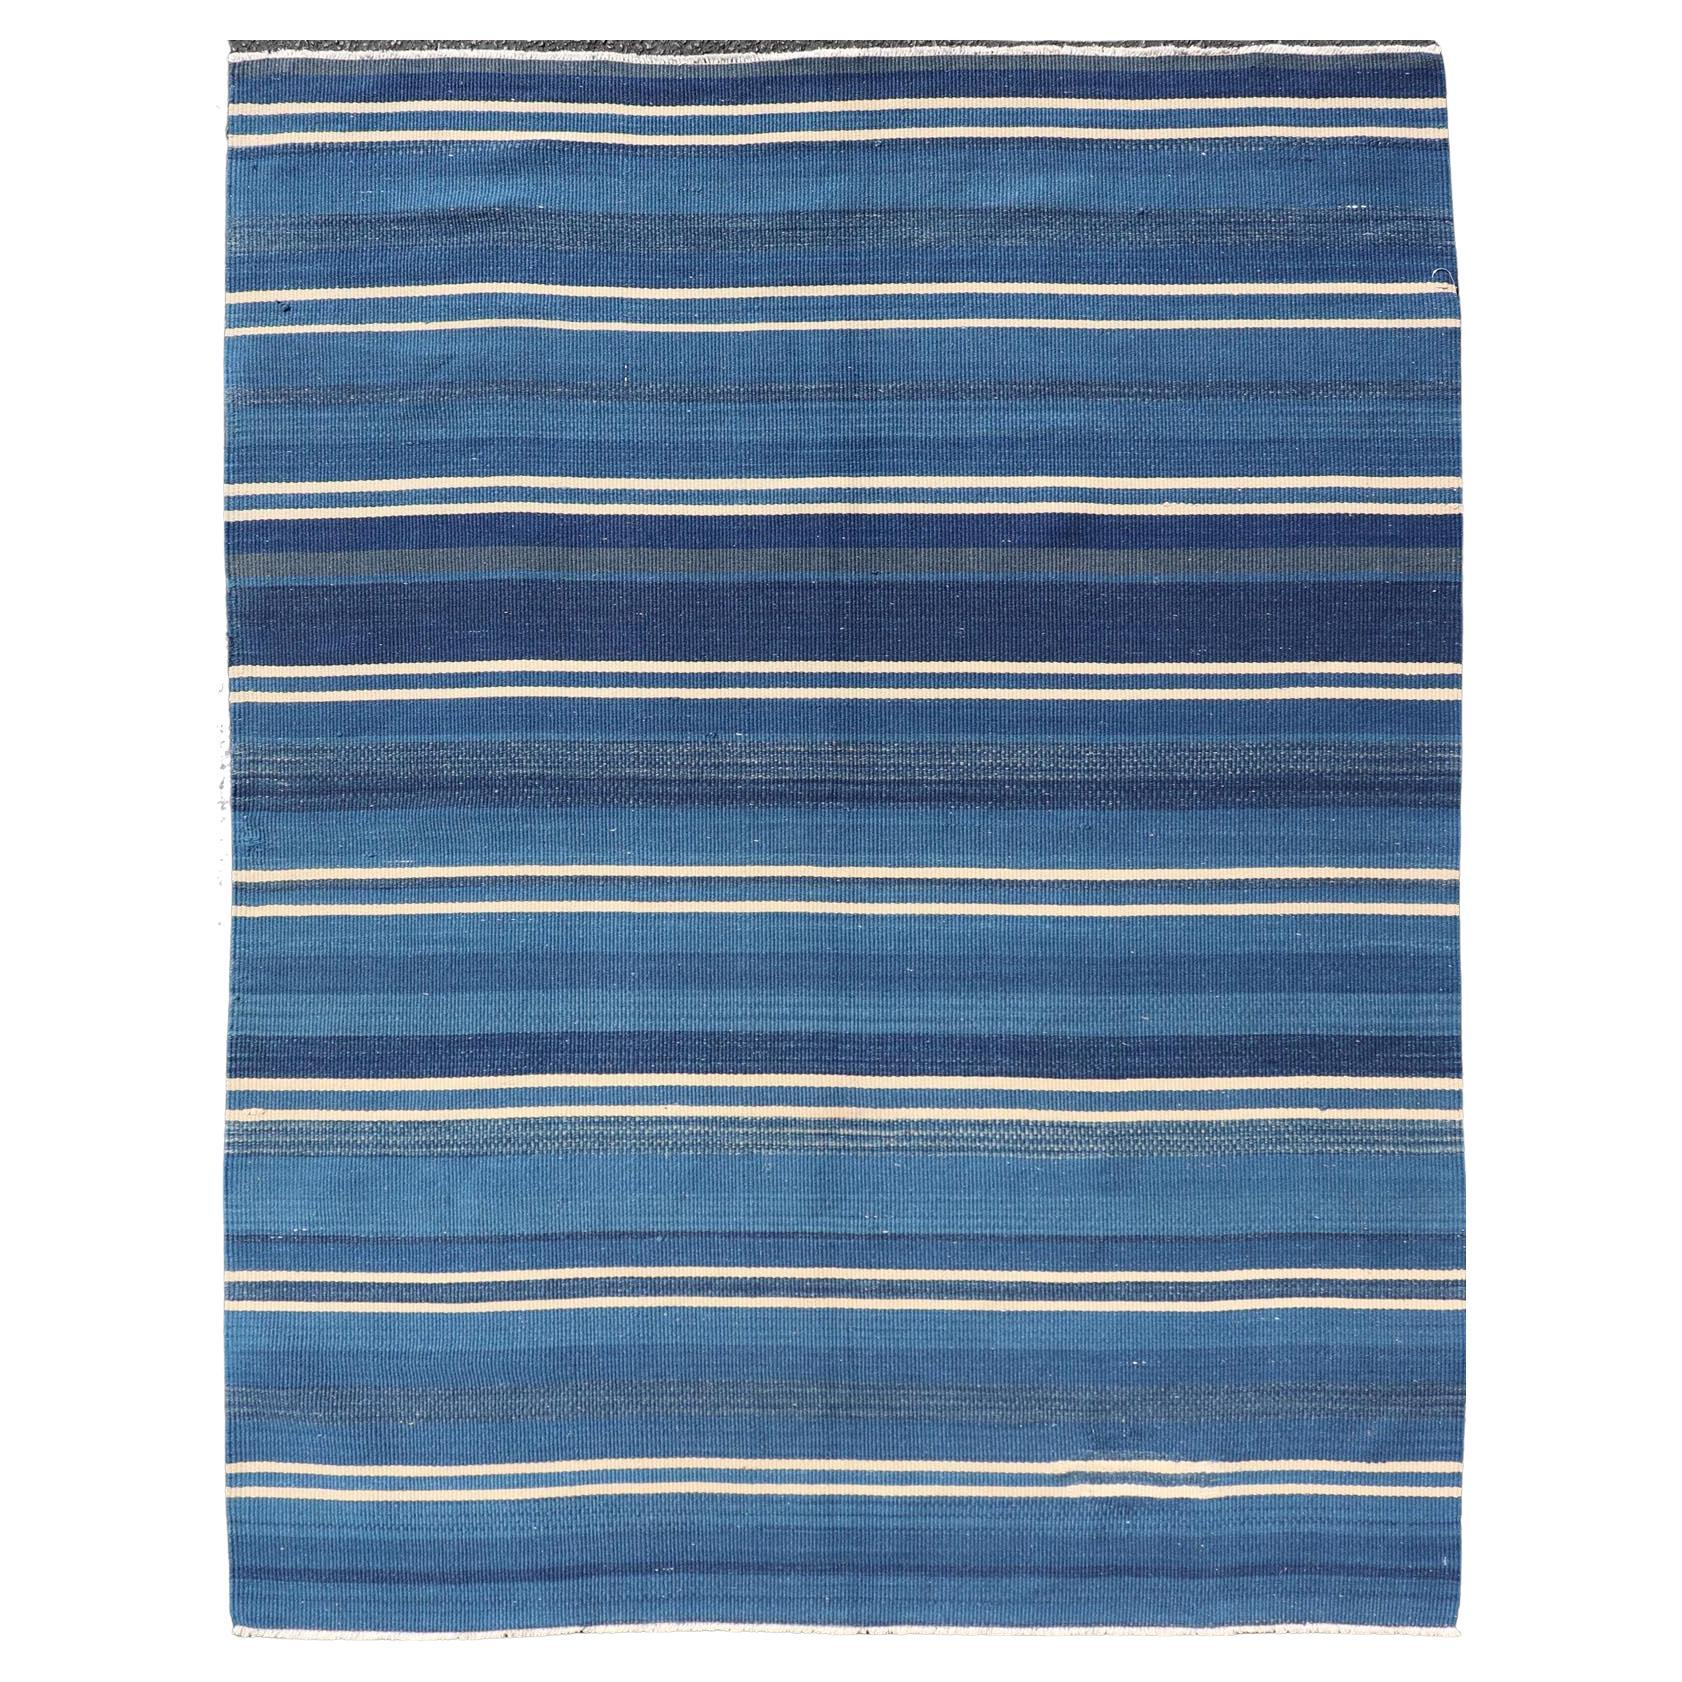 Turkish Flat-Weave Kilim in Navy Blue and Ivory in Striped Design For Sale